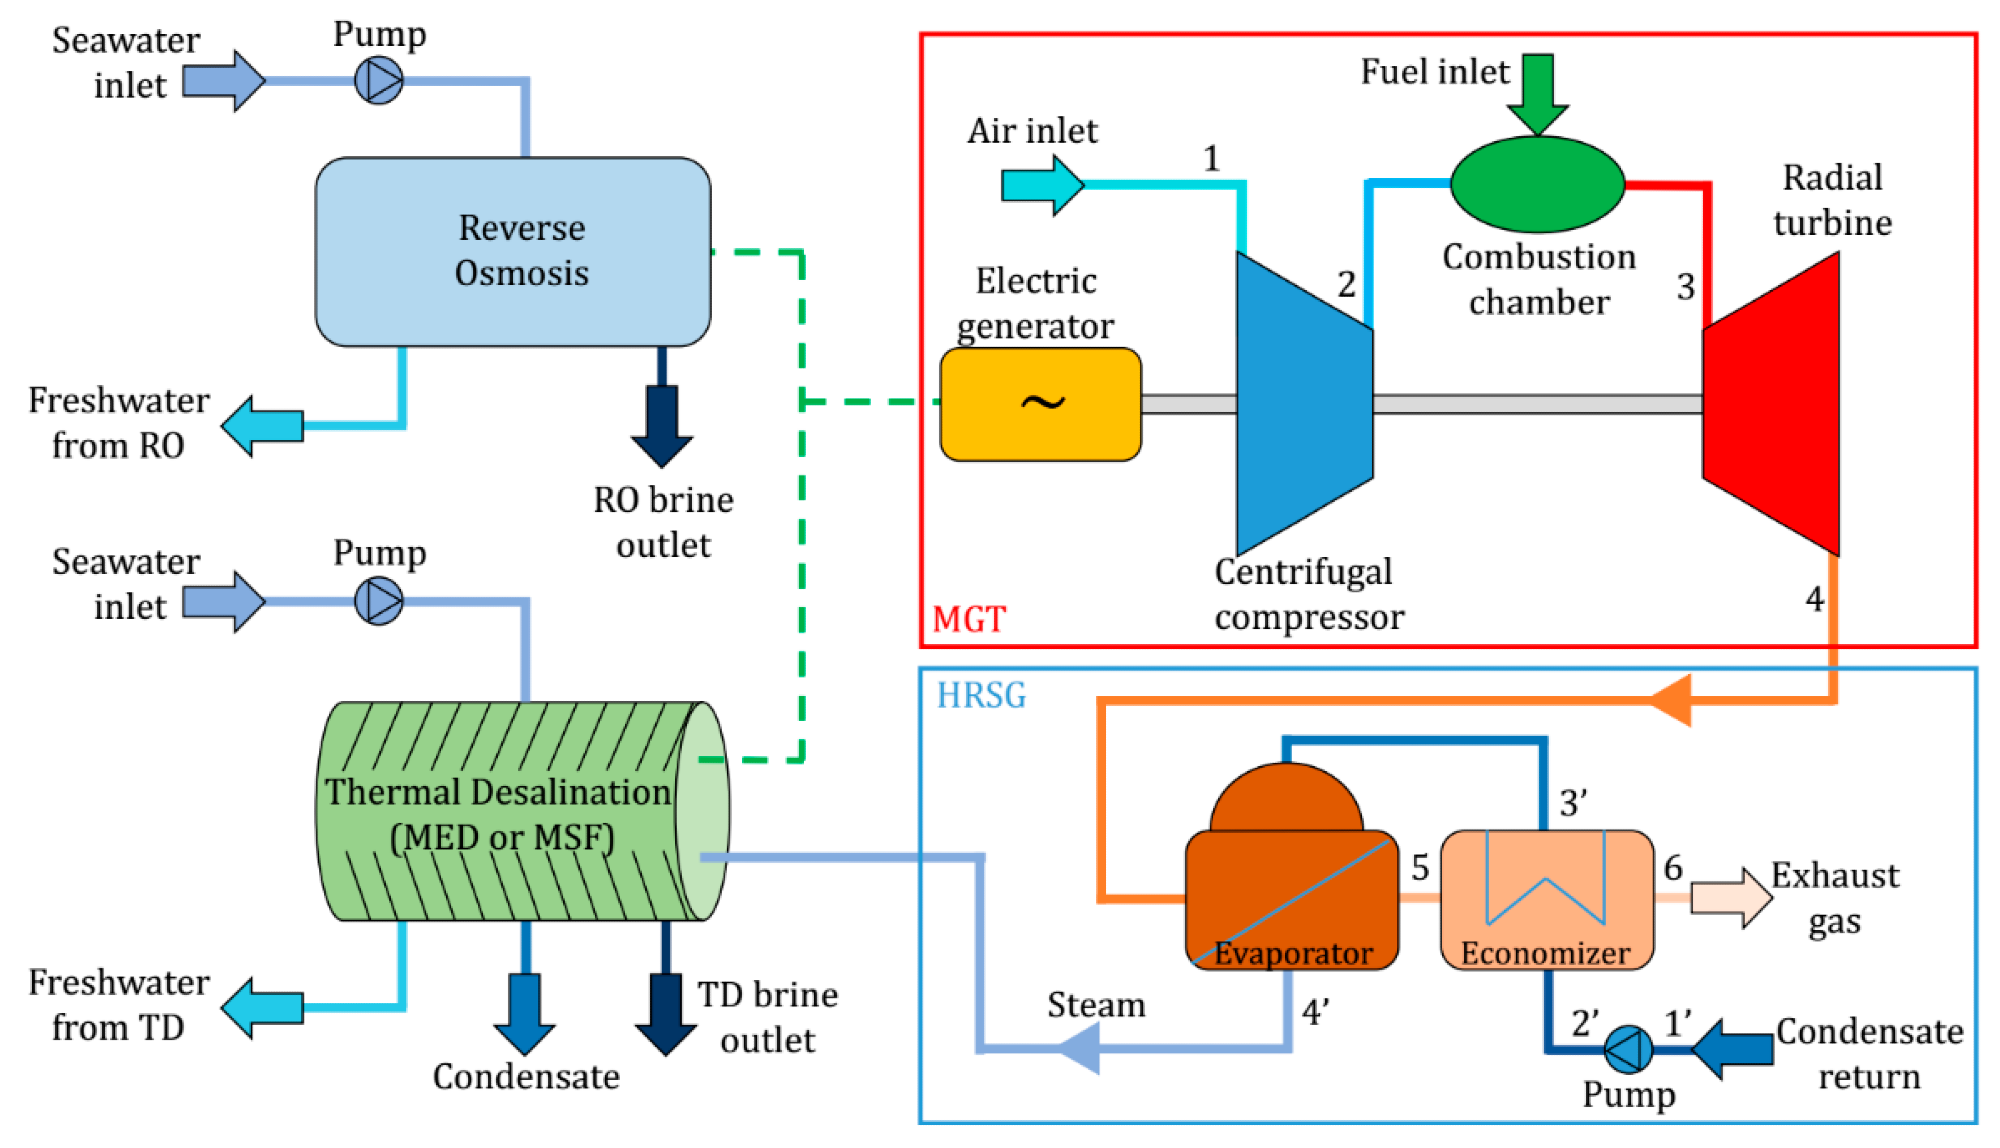 Schematic of the hybrid desalination plant coupled with the GT CHP system.